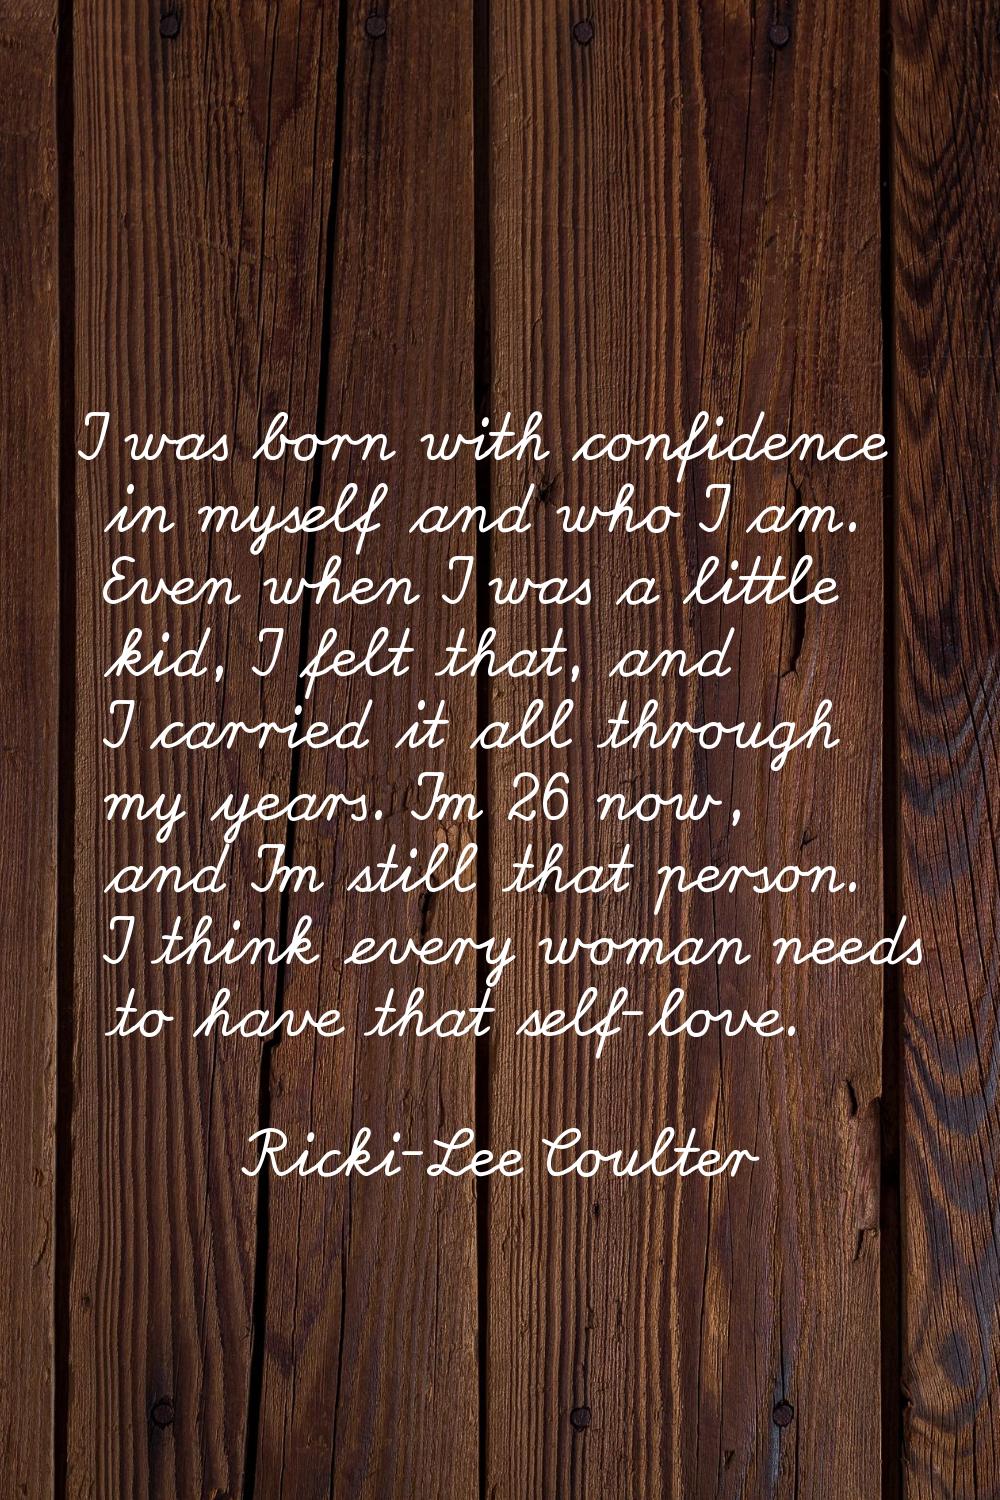 I was born with confidence in myself and who I am. Even when I was a little kid, I felt that, and I